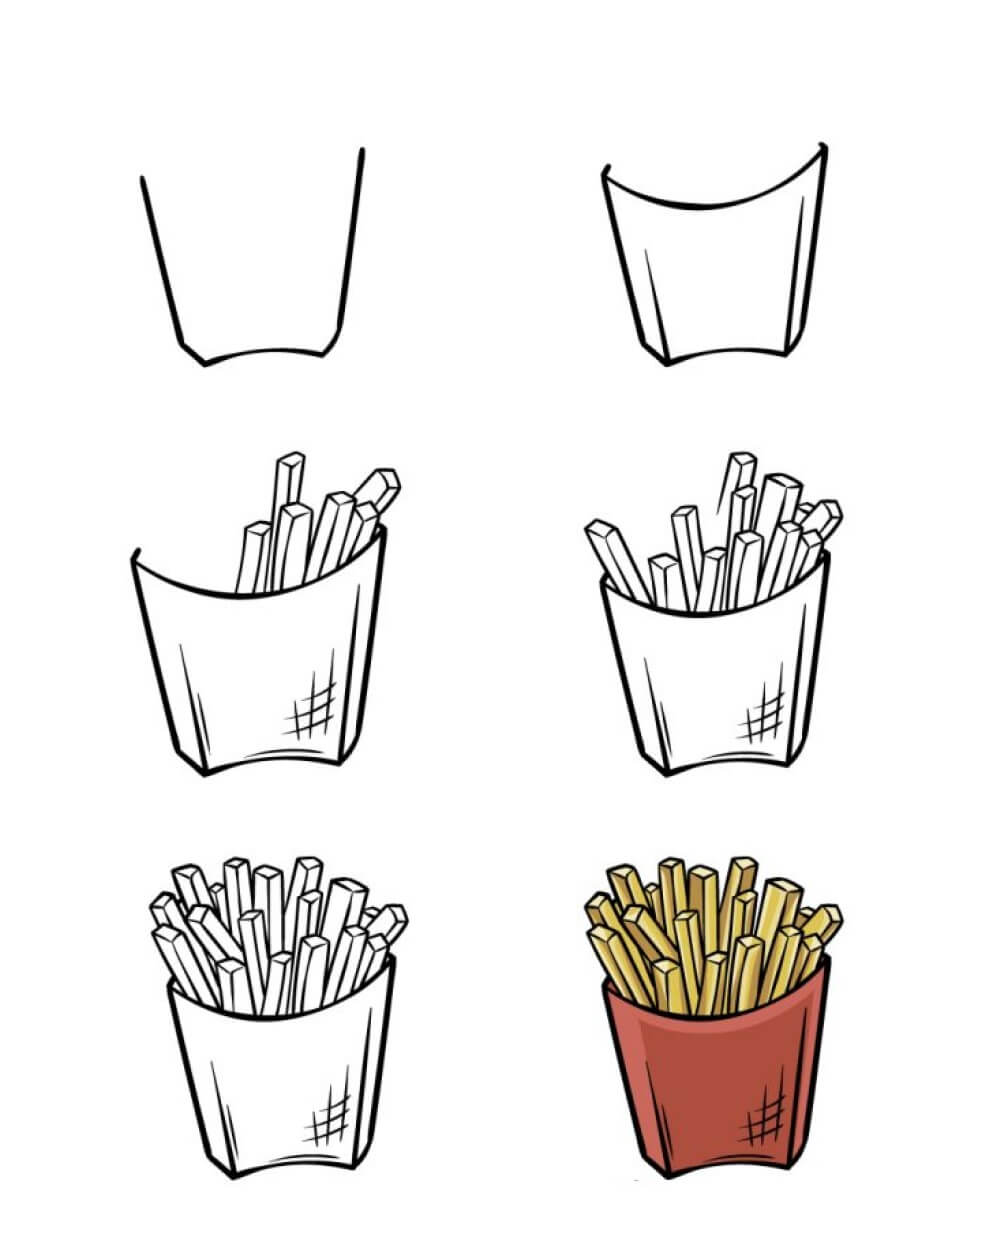 French fries (1) Drawing Ideas